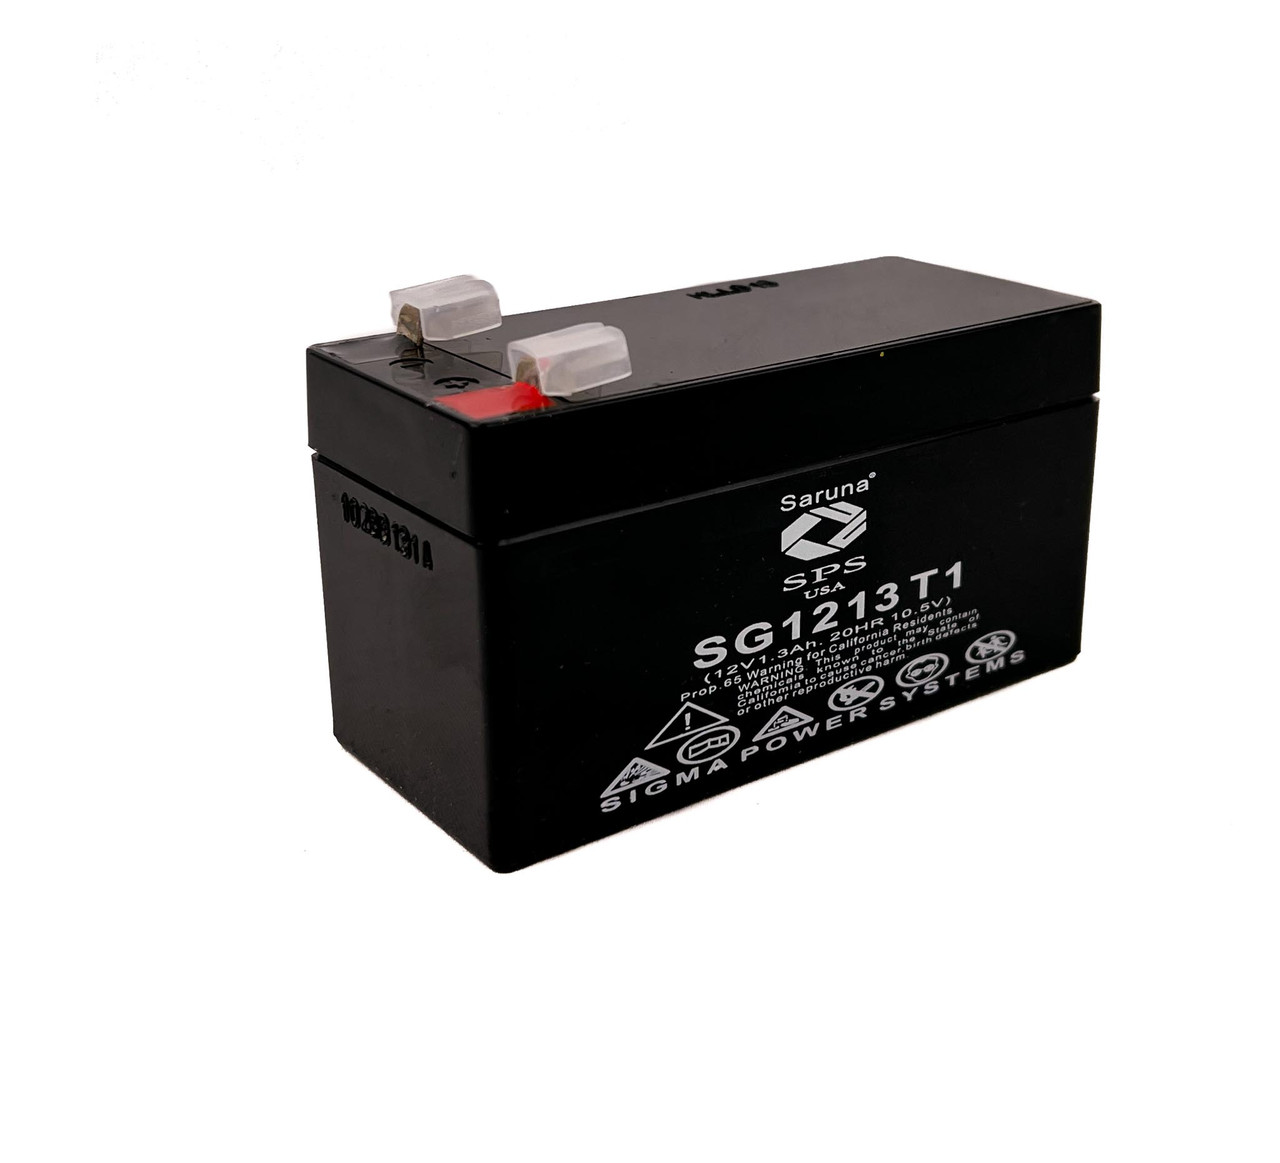 Raion Power 12V 1.3Ah Non-Spillable Replacement Rechargebale Battery for 2013 Mercedes-Benz GL 450 Base 4.6L V8 Gas